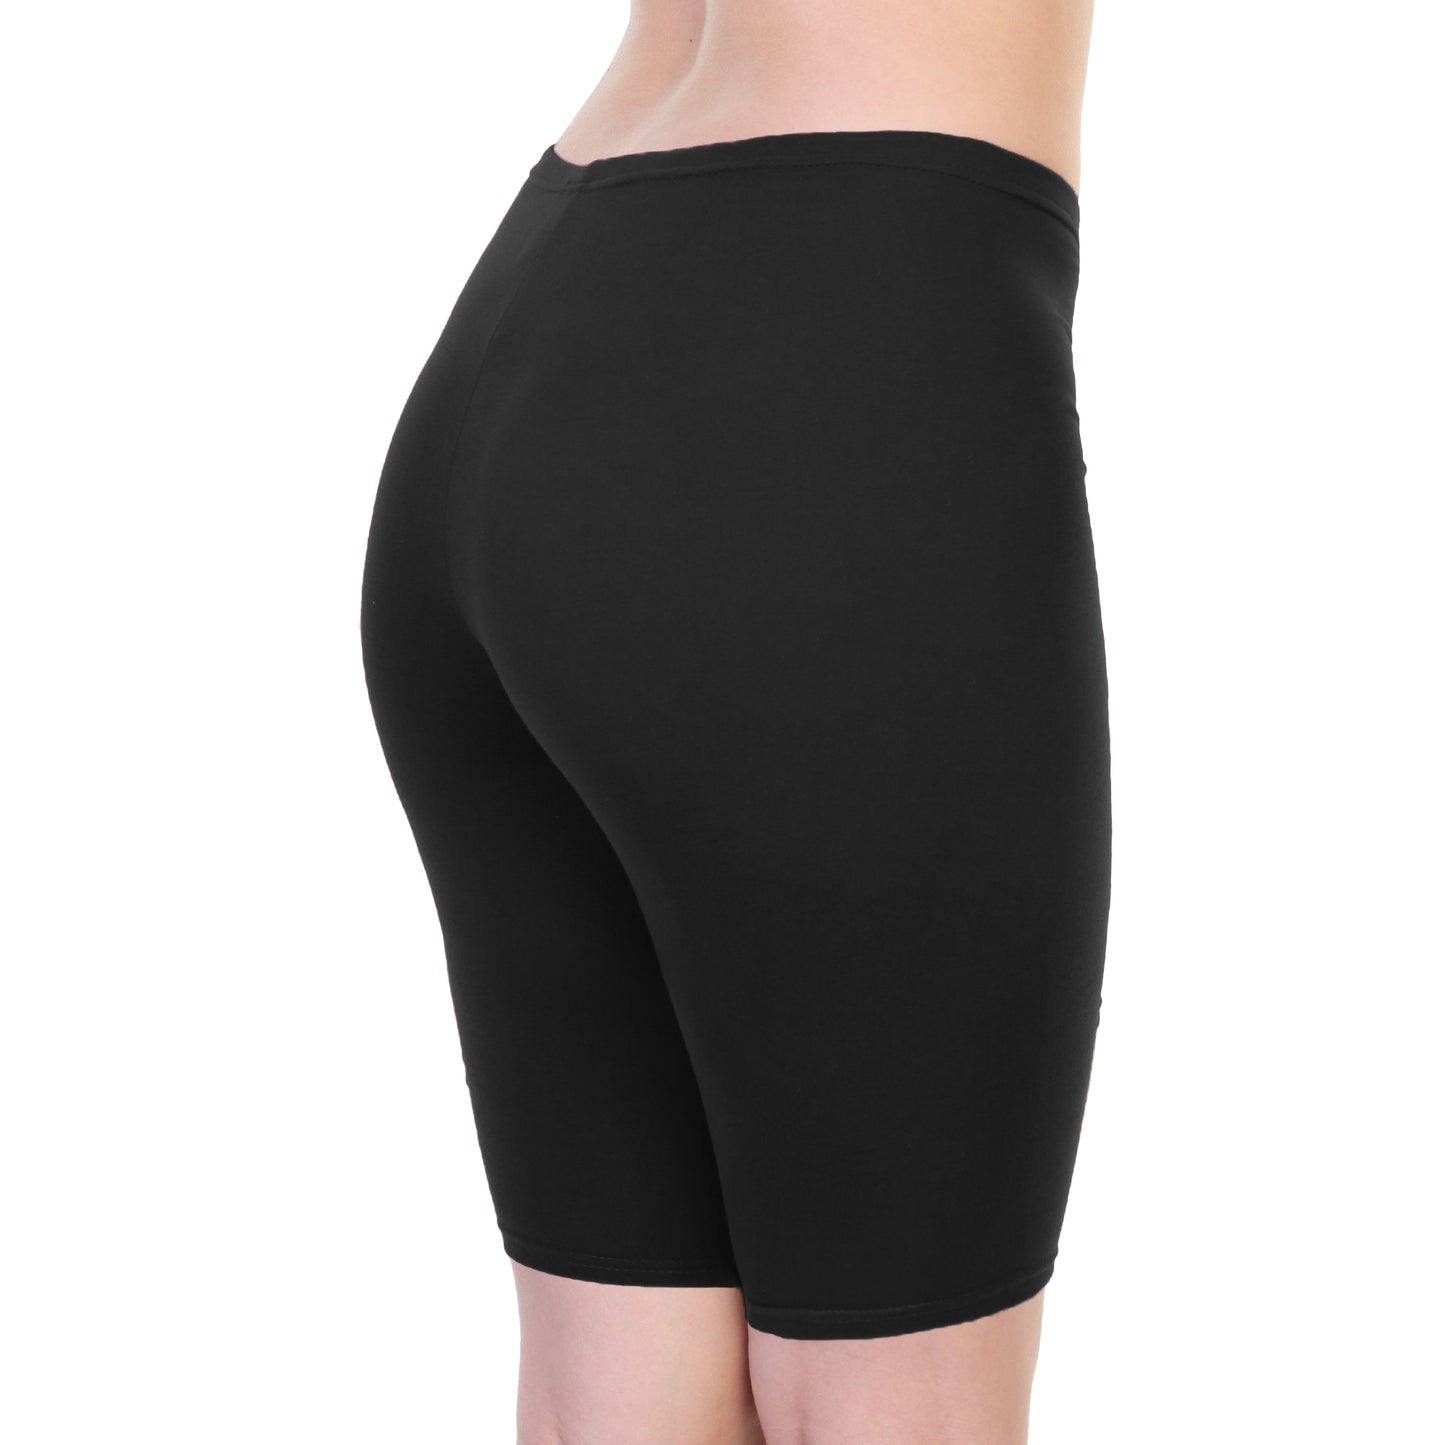 Angelina Cotton Above The Knee Safety Bike Short Panties (6 or 12 Pack), #G6736